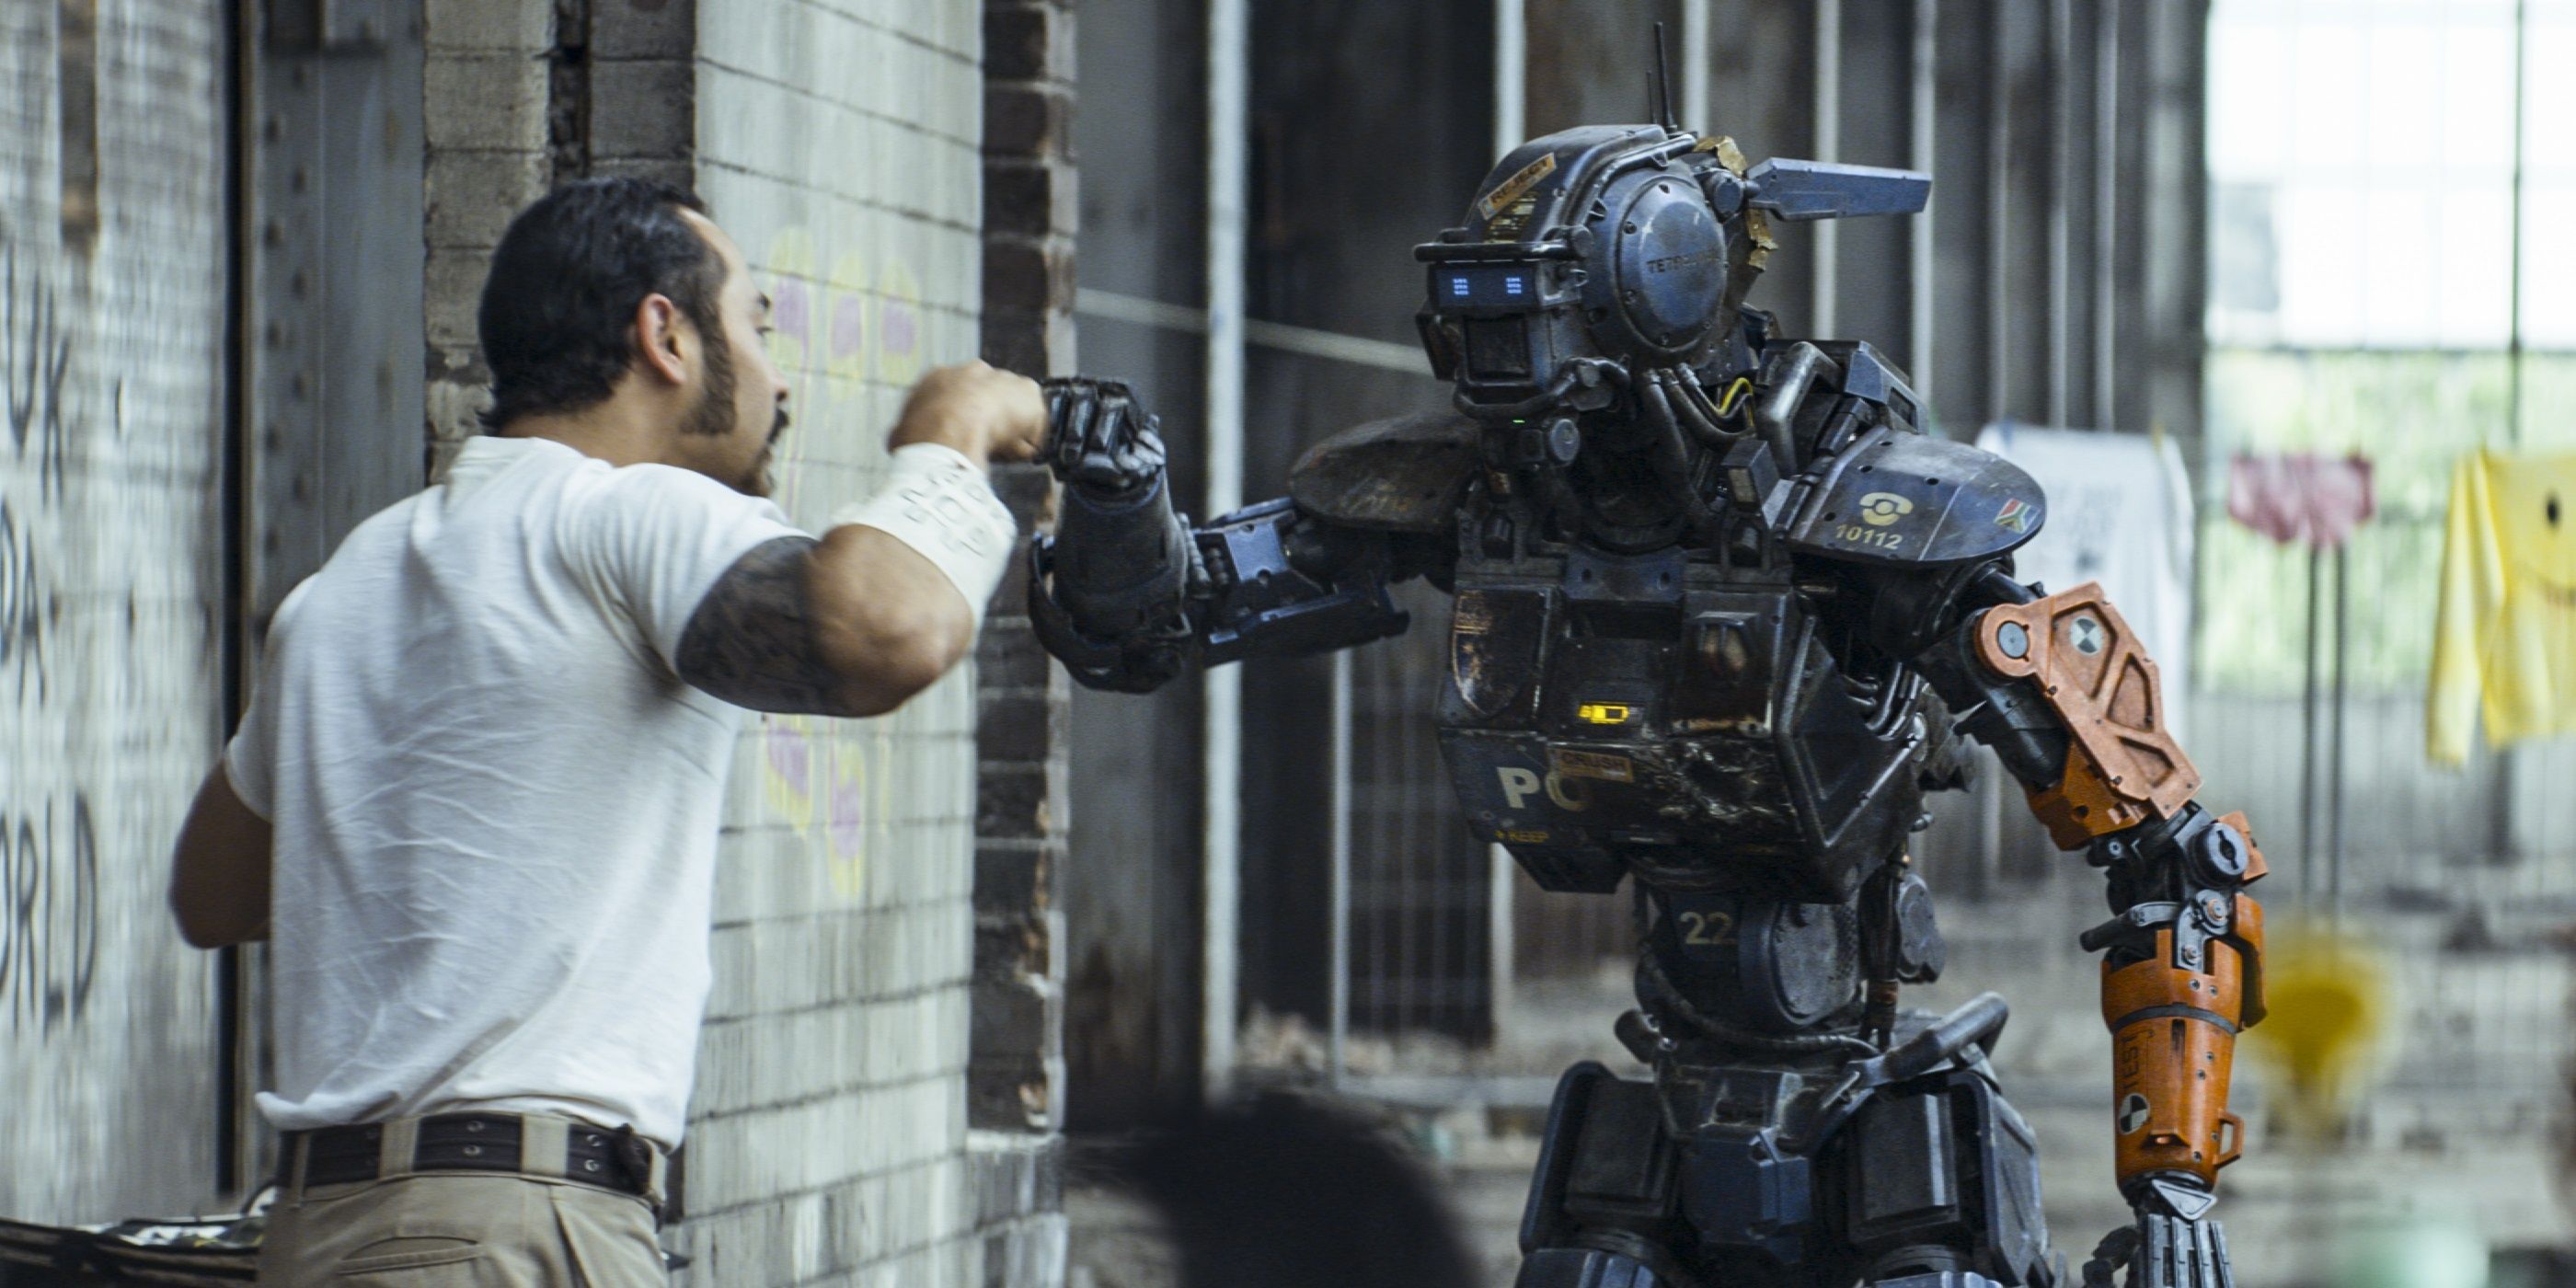 The titular robot Chappie fist bumping in the movie.